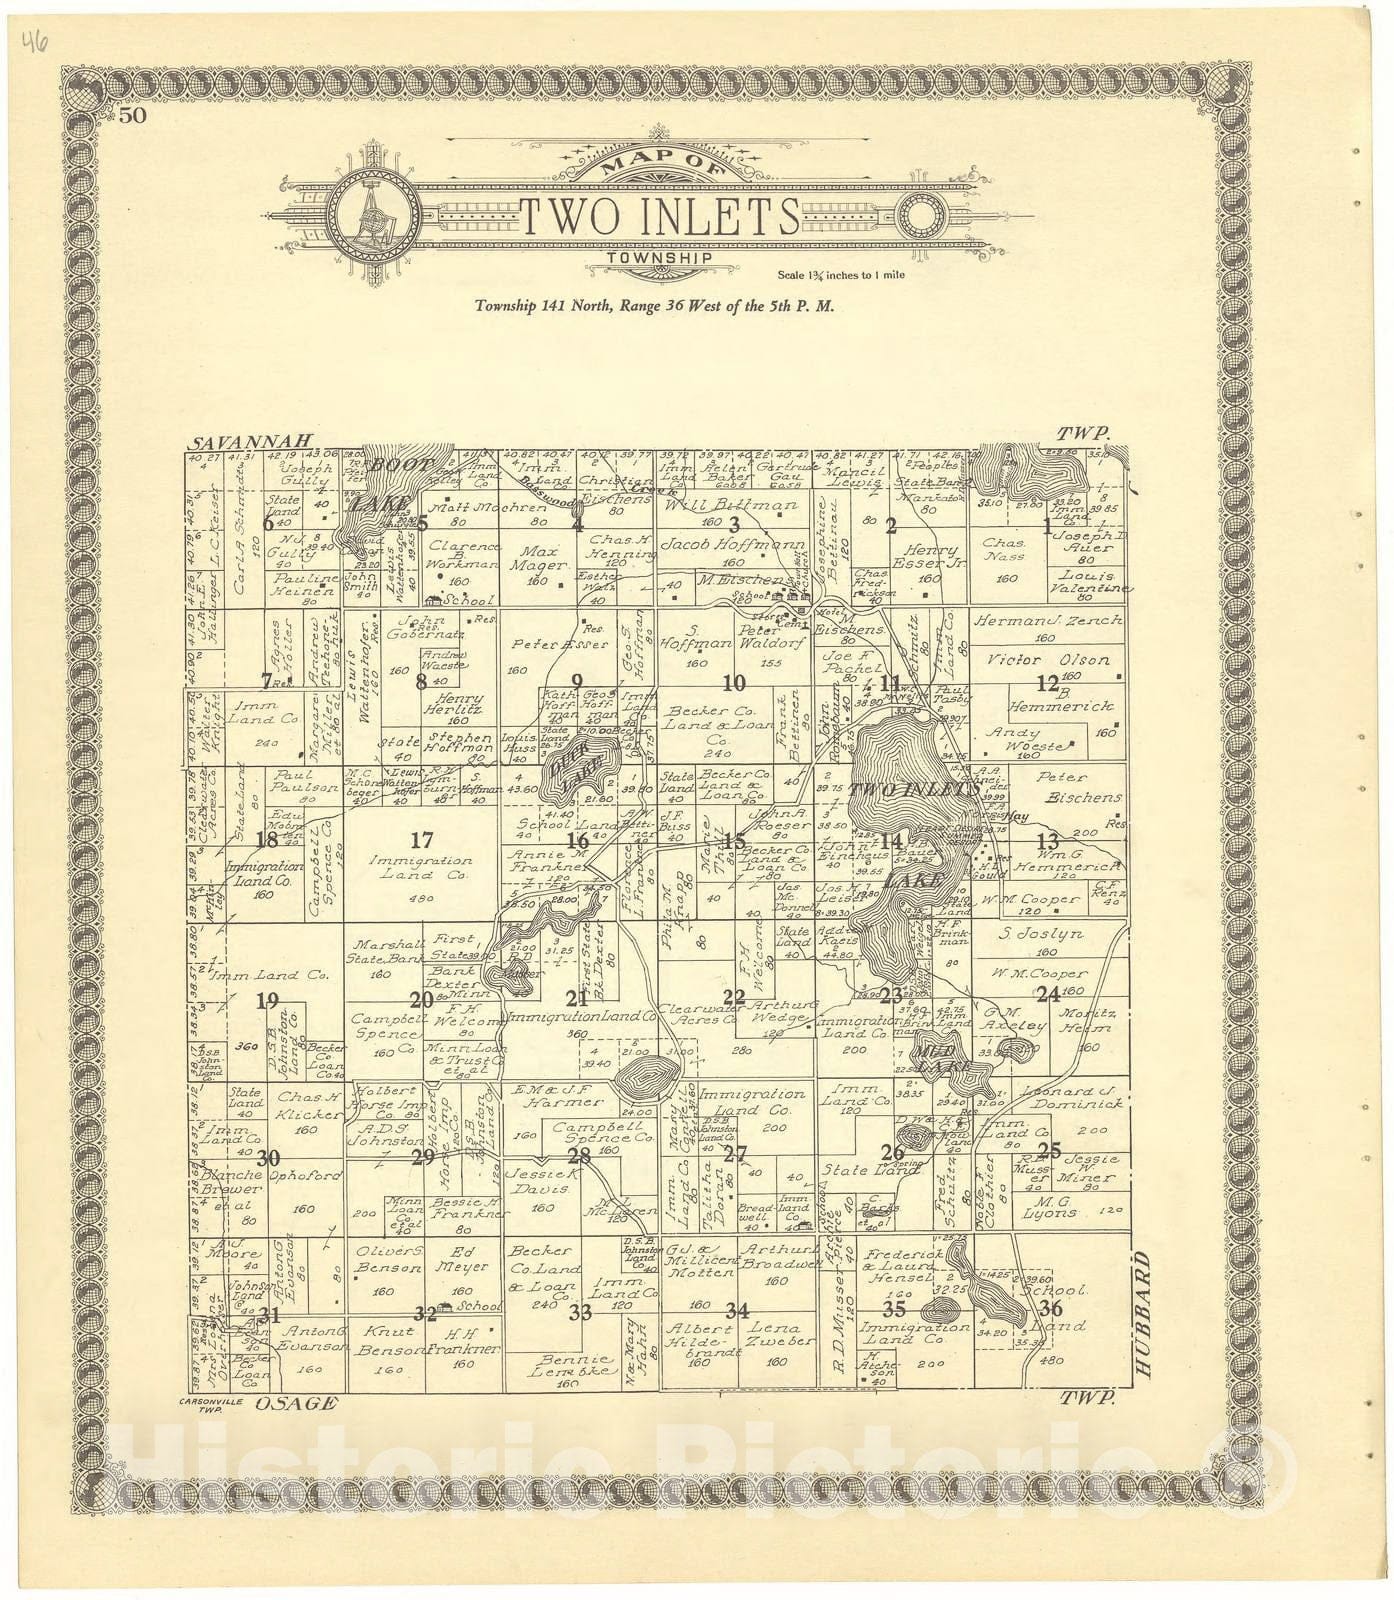 Historic 1929 Map - Standard Atlas of Becker County, Minnesota - Map of Two Inlets Township